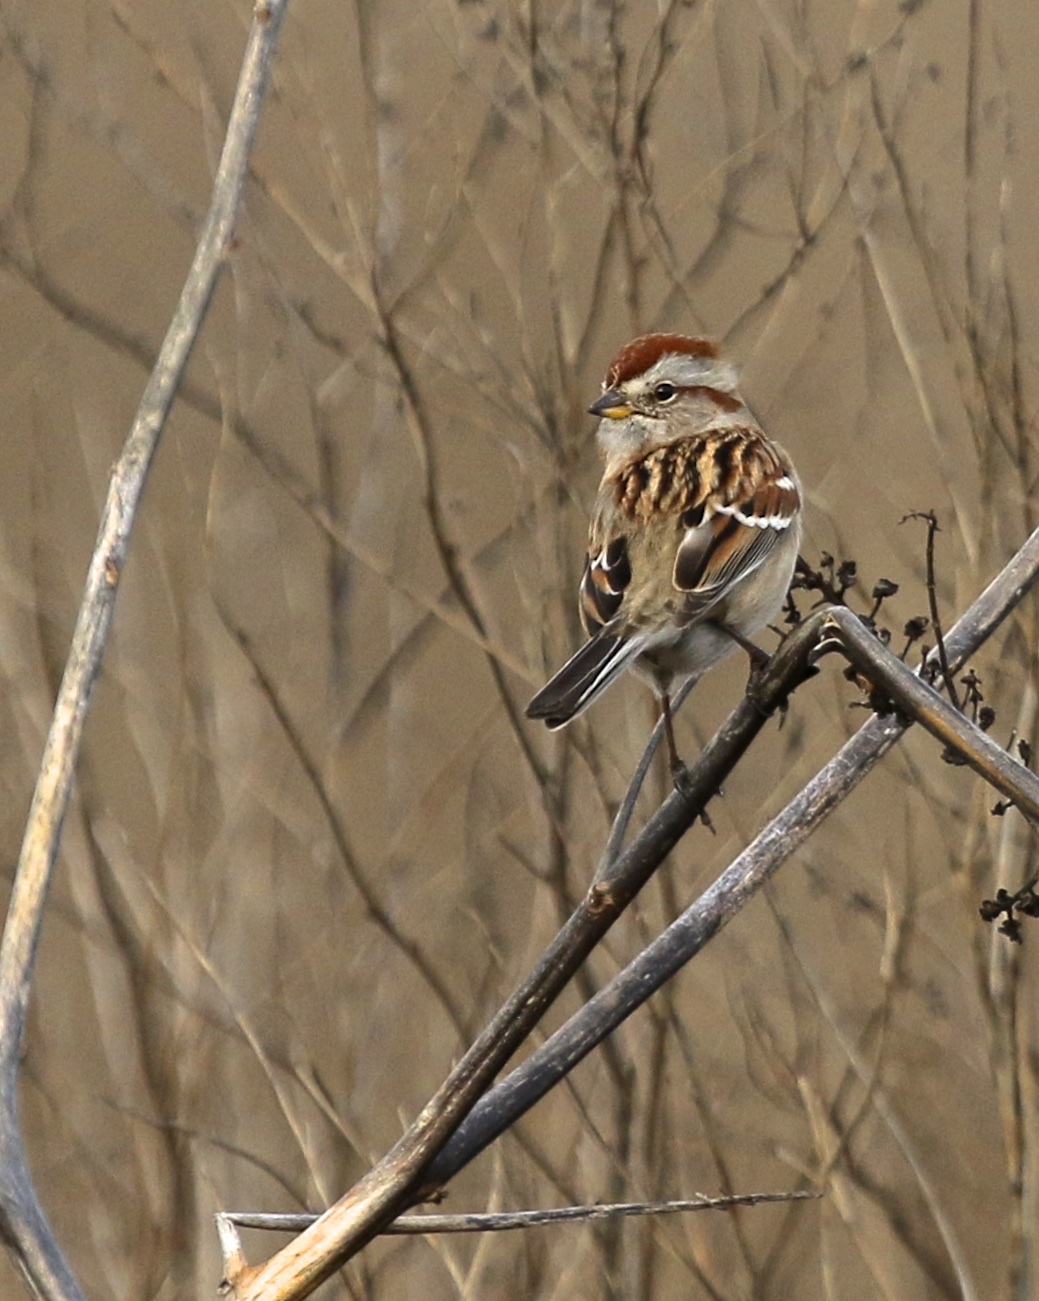 ~I am totally loving the Tree Sparrows this year, I just think they are a super looking sparrow. Walked River National Wildlife Refuge, 12/28/15.~